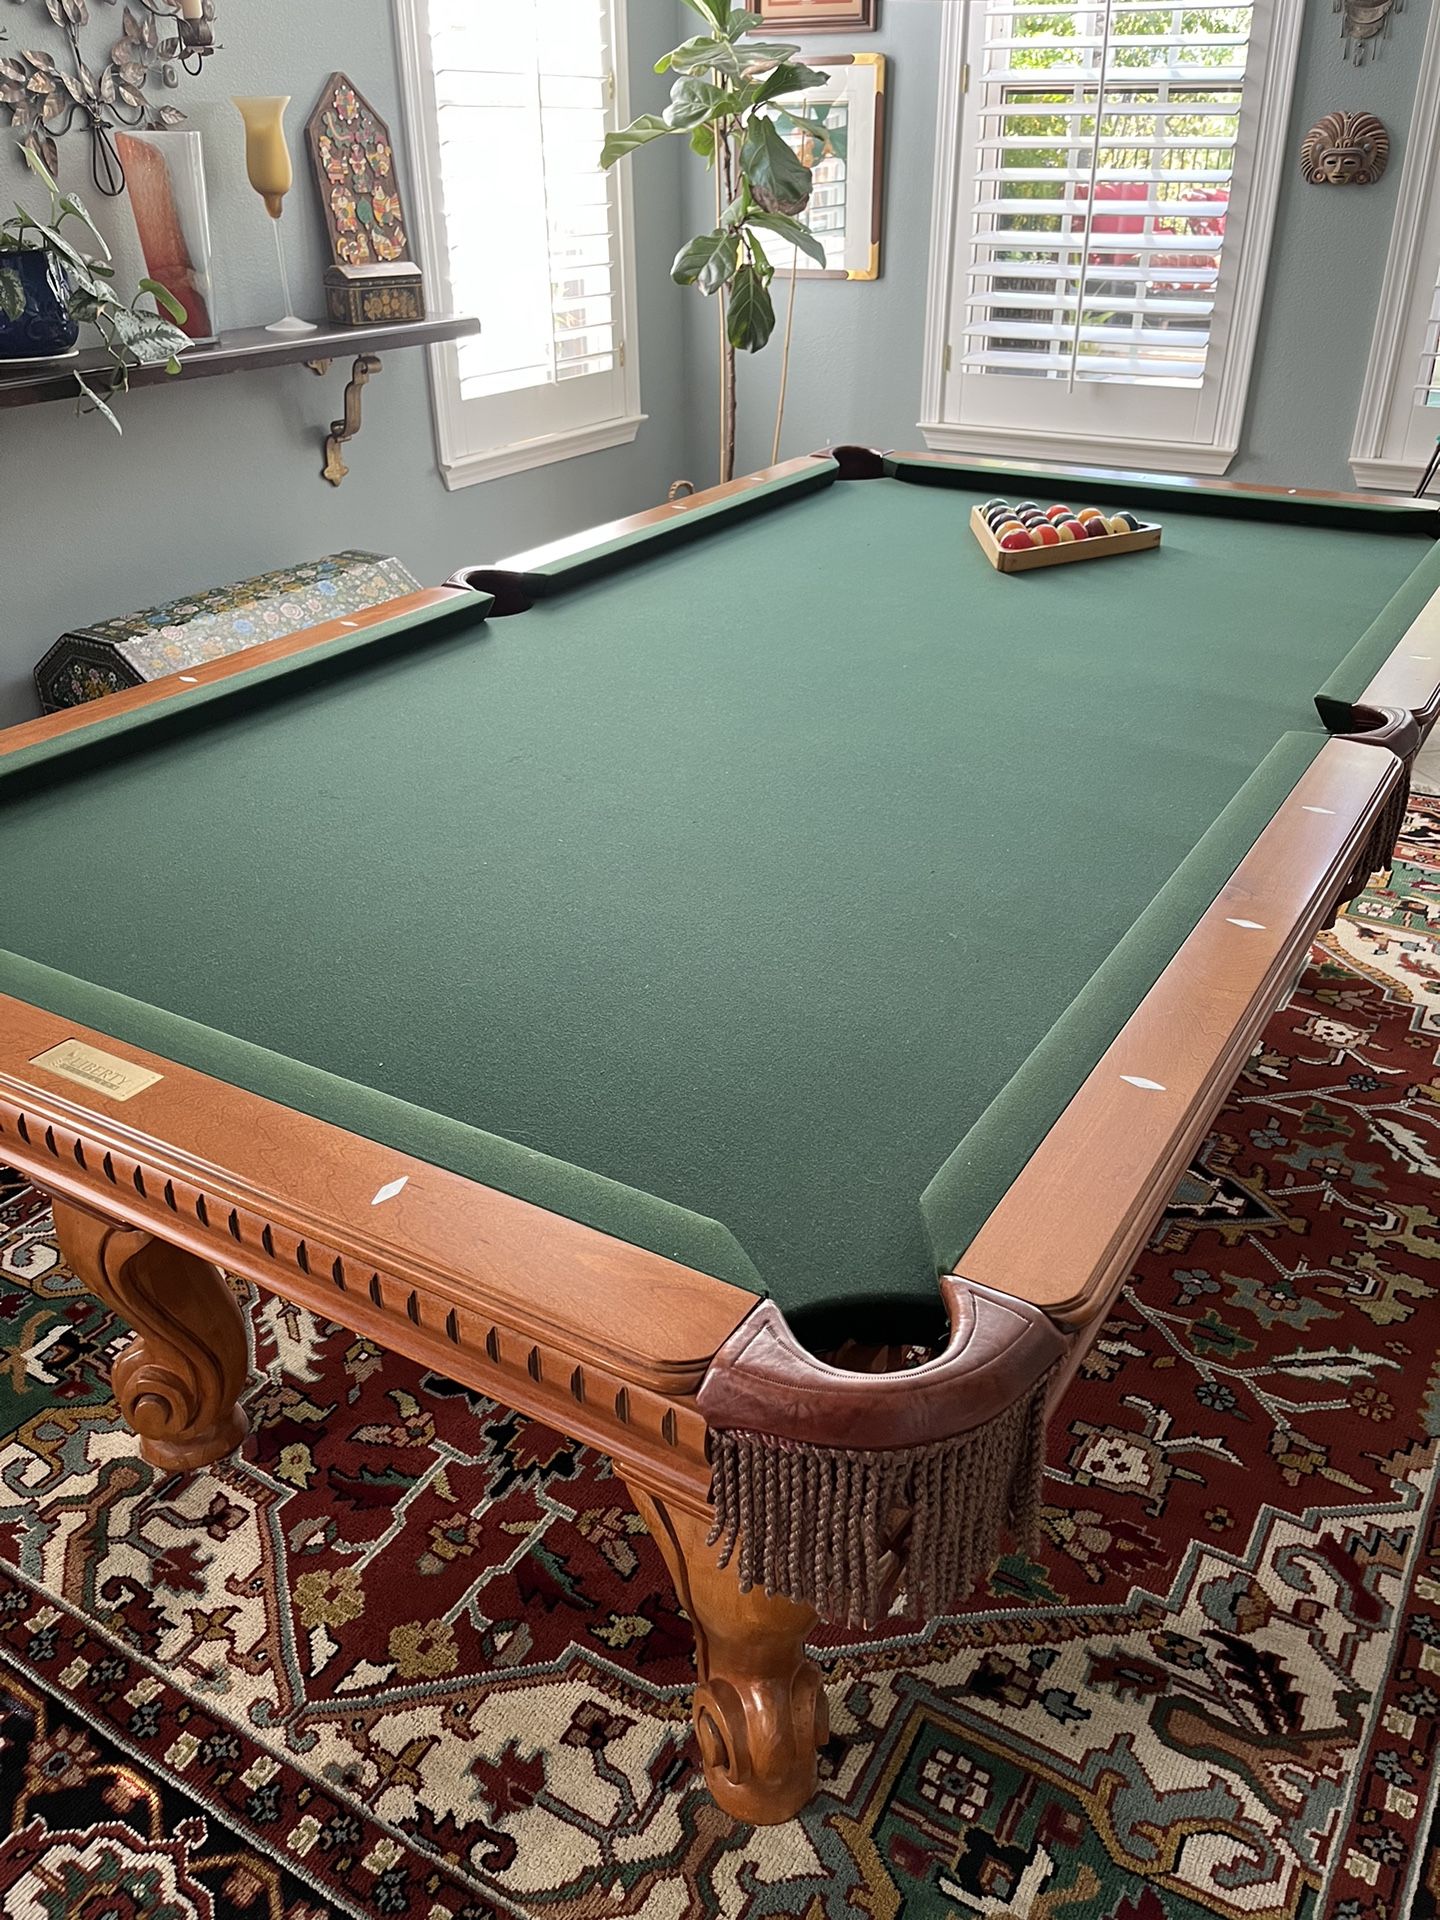 Pool Table - Great Condition 